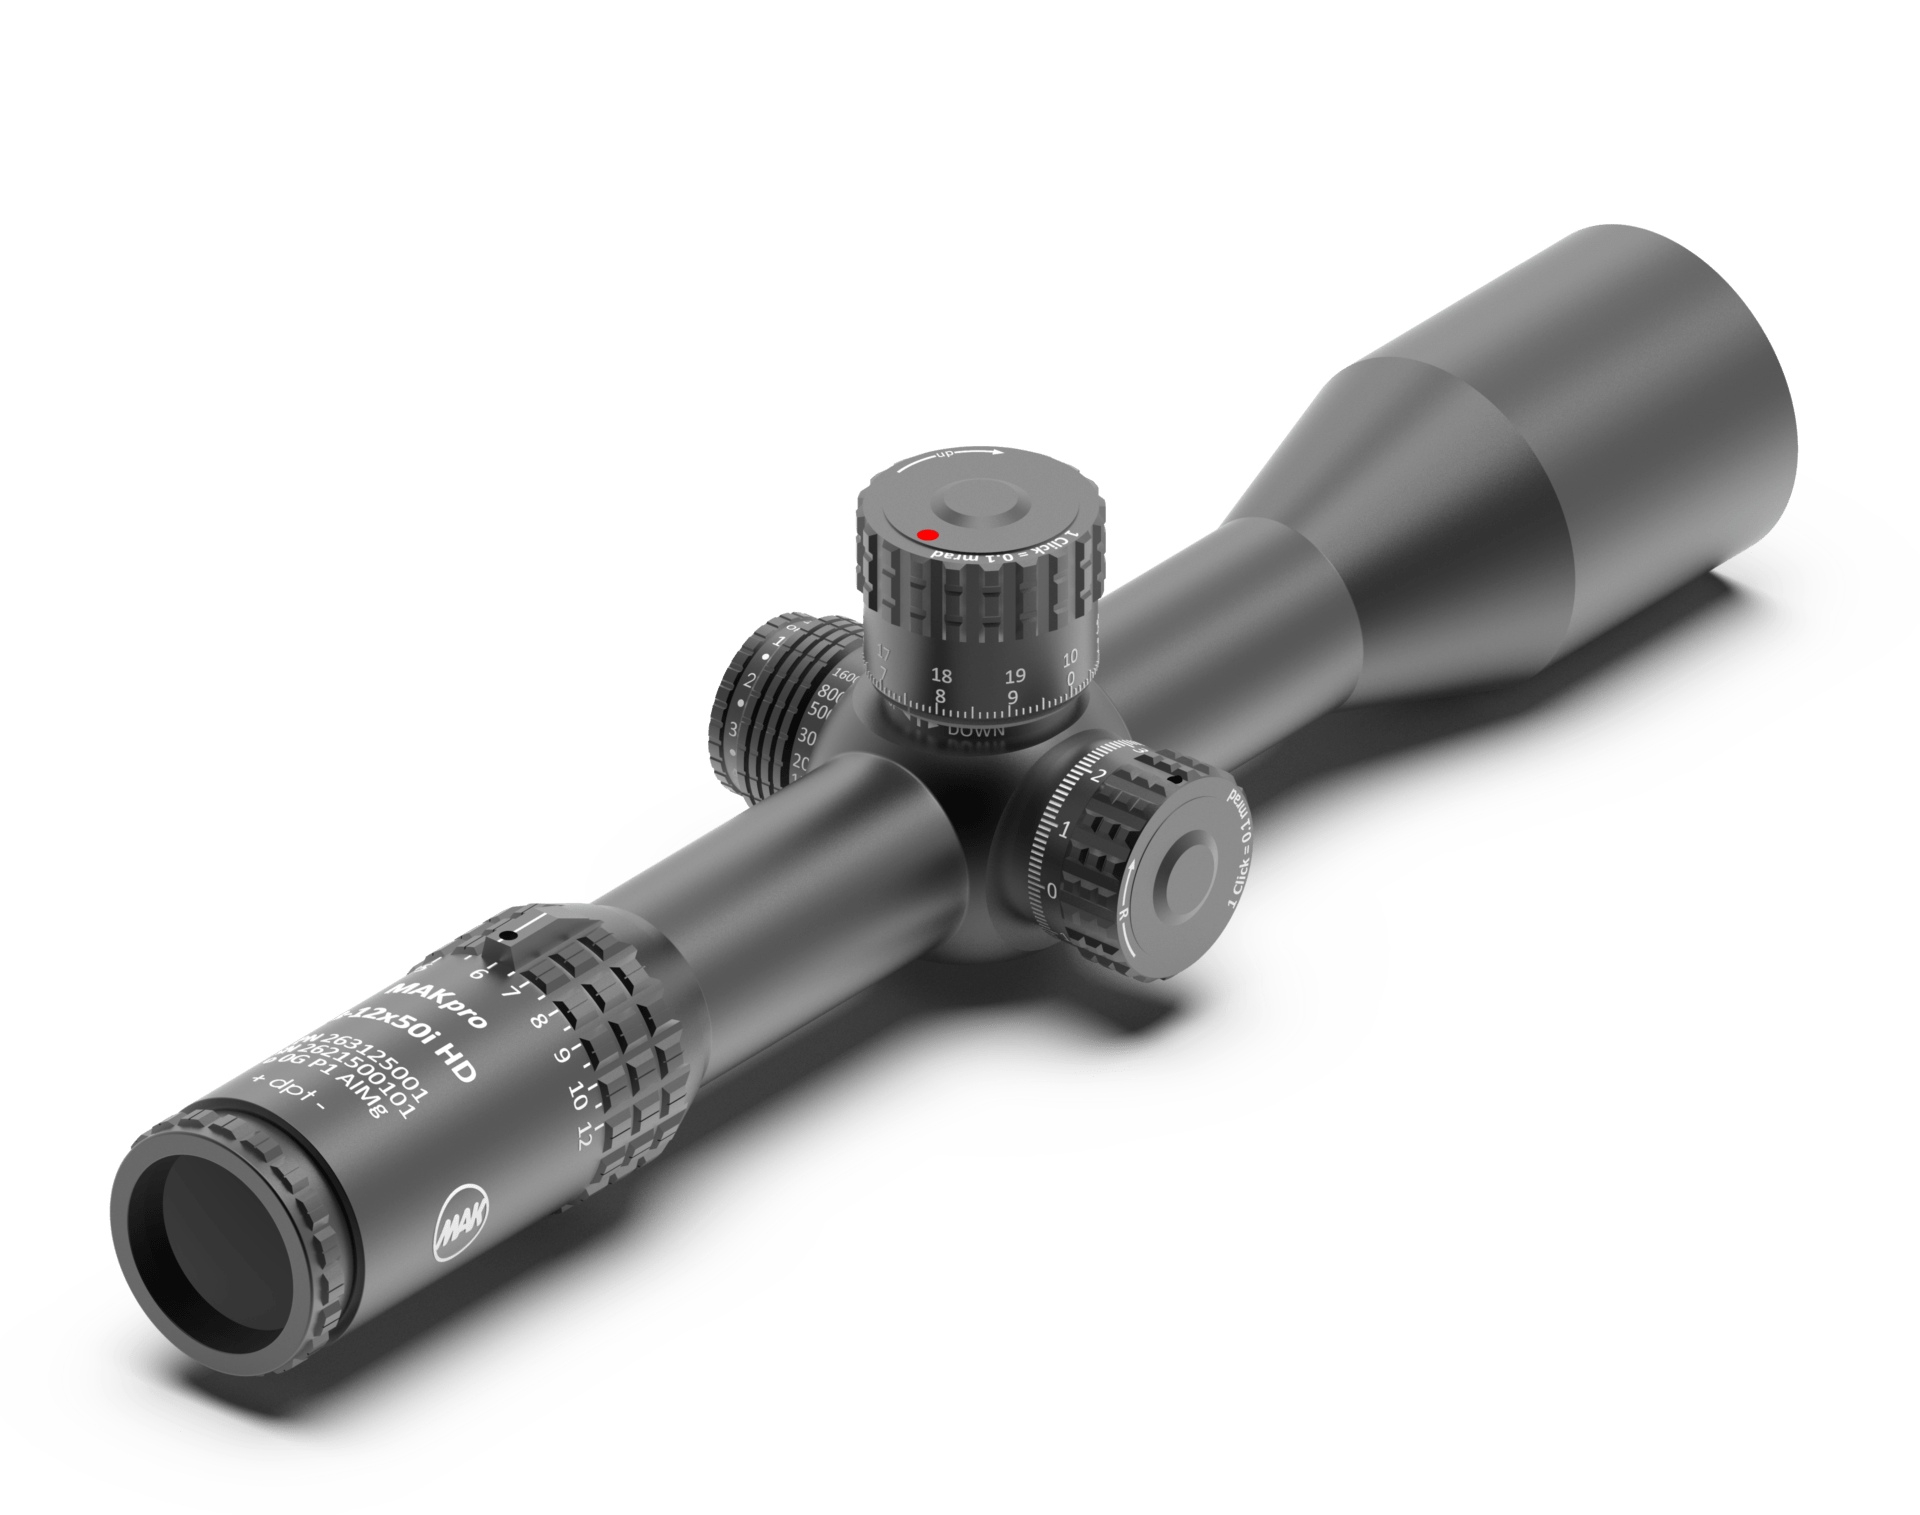 The MAKpro 5-25x56i HD is the ultimate long range riflescope for long distances and large calibers. Patented height tower with indicator pin. Absolute reliable repeatability, accuracy and precision with clear defined clicks.